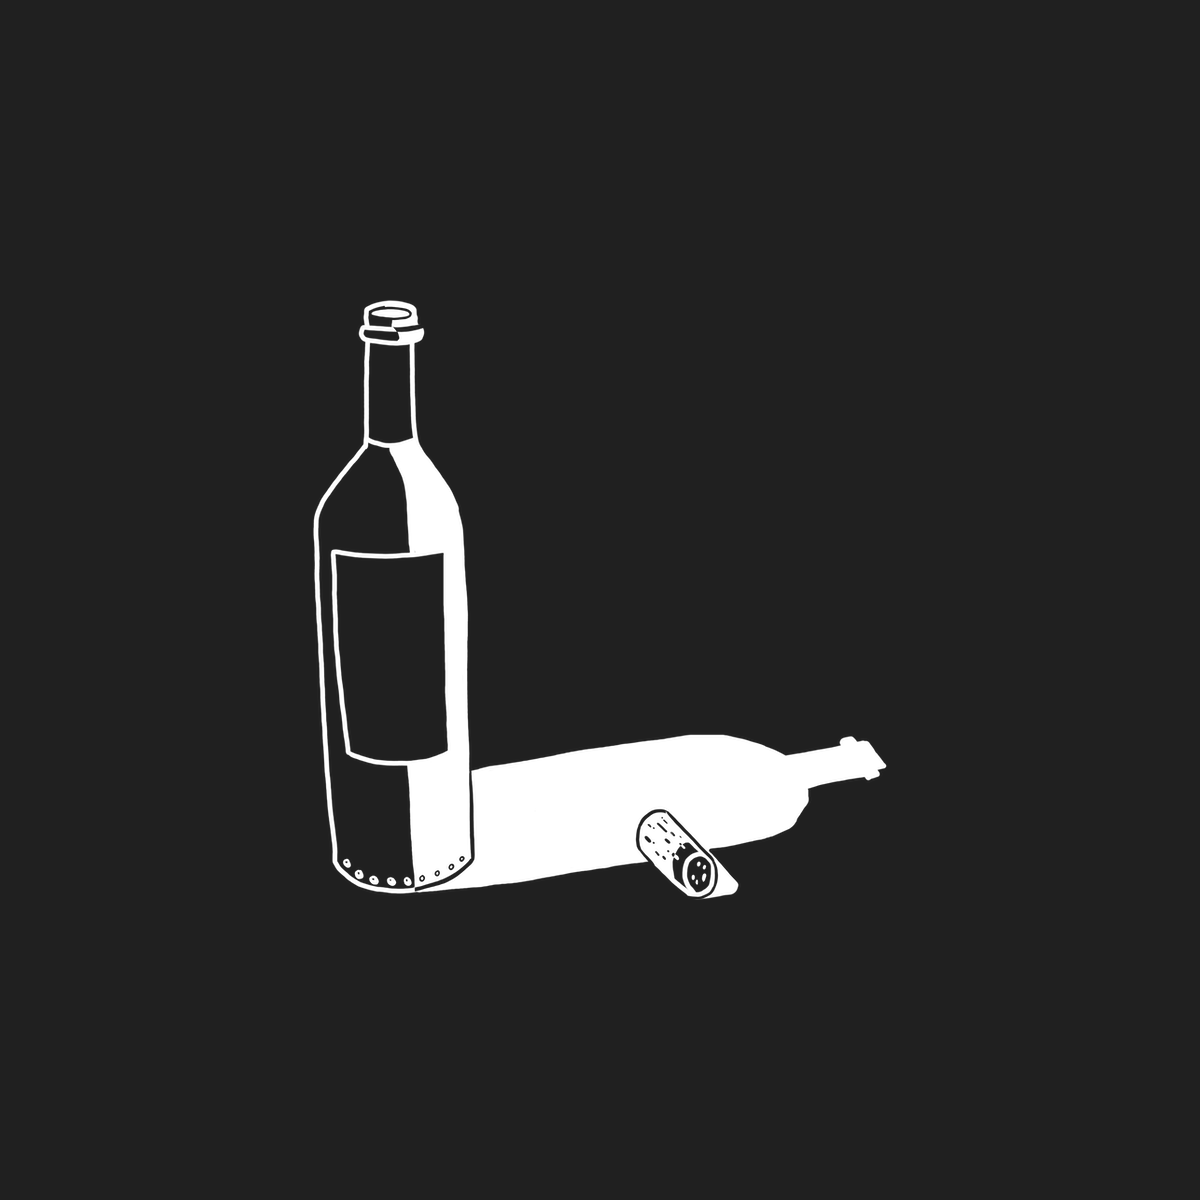 🍷🎨 Raise a glass to 'Bottles & Cans' illustrations by #JordiBarenysHaya 🍾🖌️ Perfect for foodies and wine enthusiasts. Celebrate #NationalWineDay with creativity! Cheers! weareskribbl.com/bottles-cans/ 🥂🎨 #BottlesAndCans #WineDay #DesignInspiration 🔗🍷